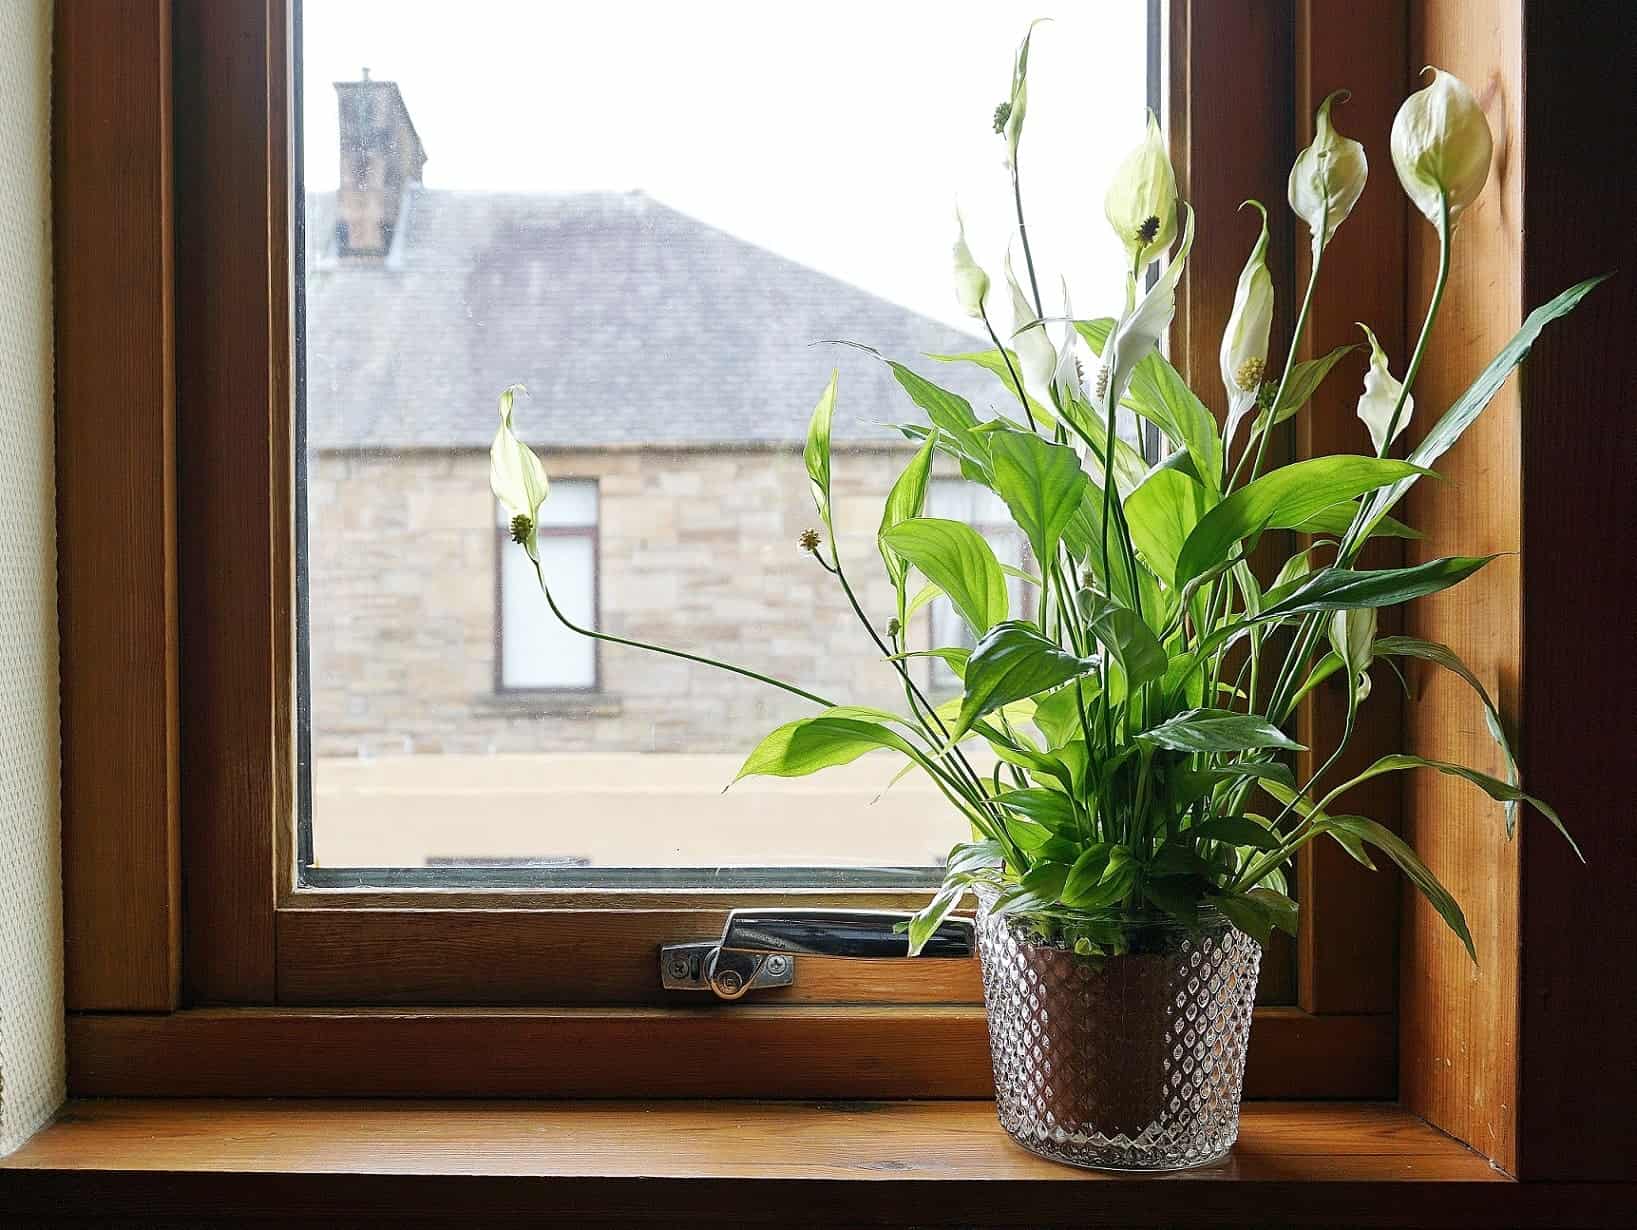 A beautiful star lily plant along the window